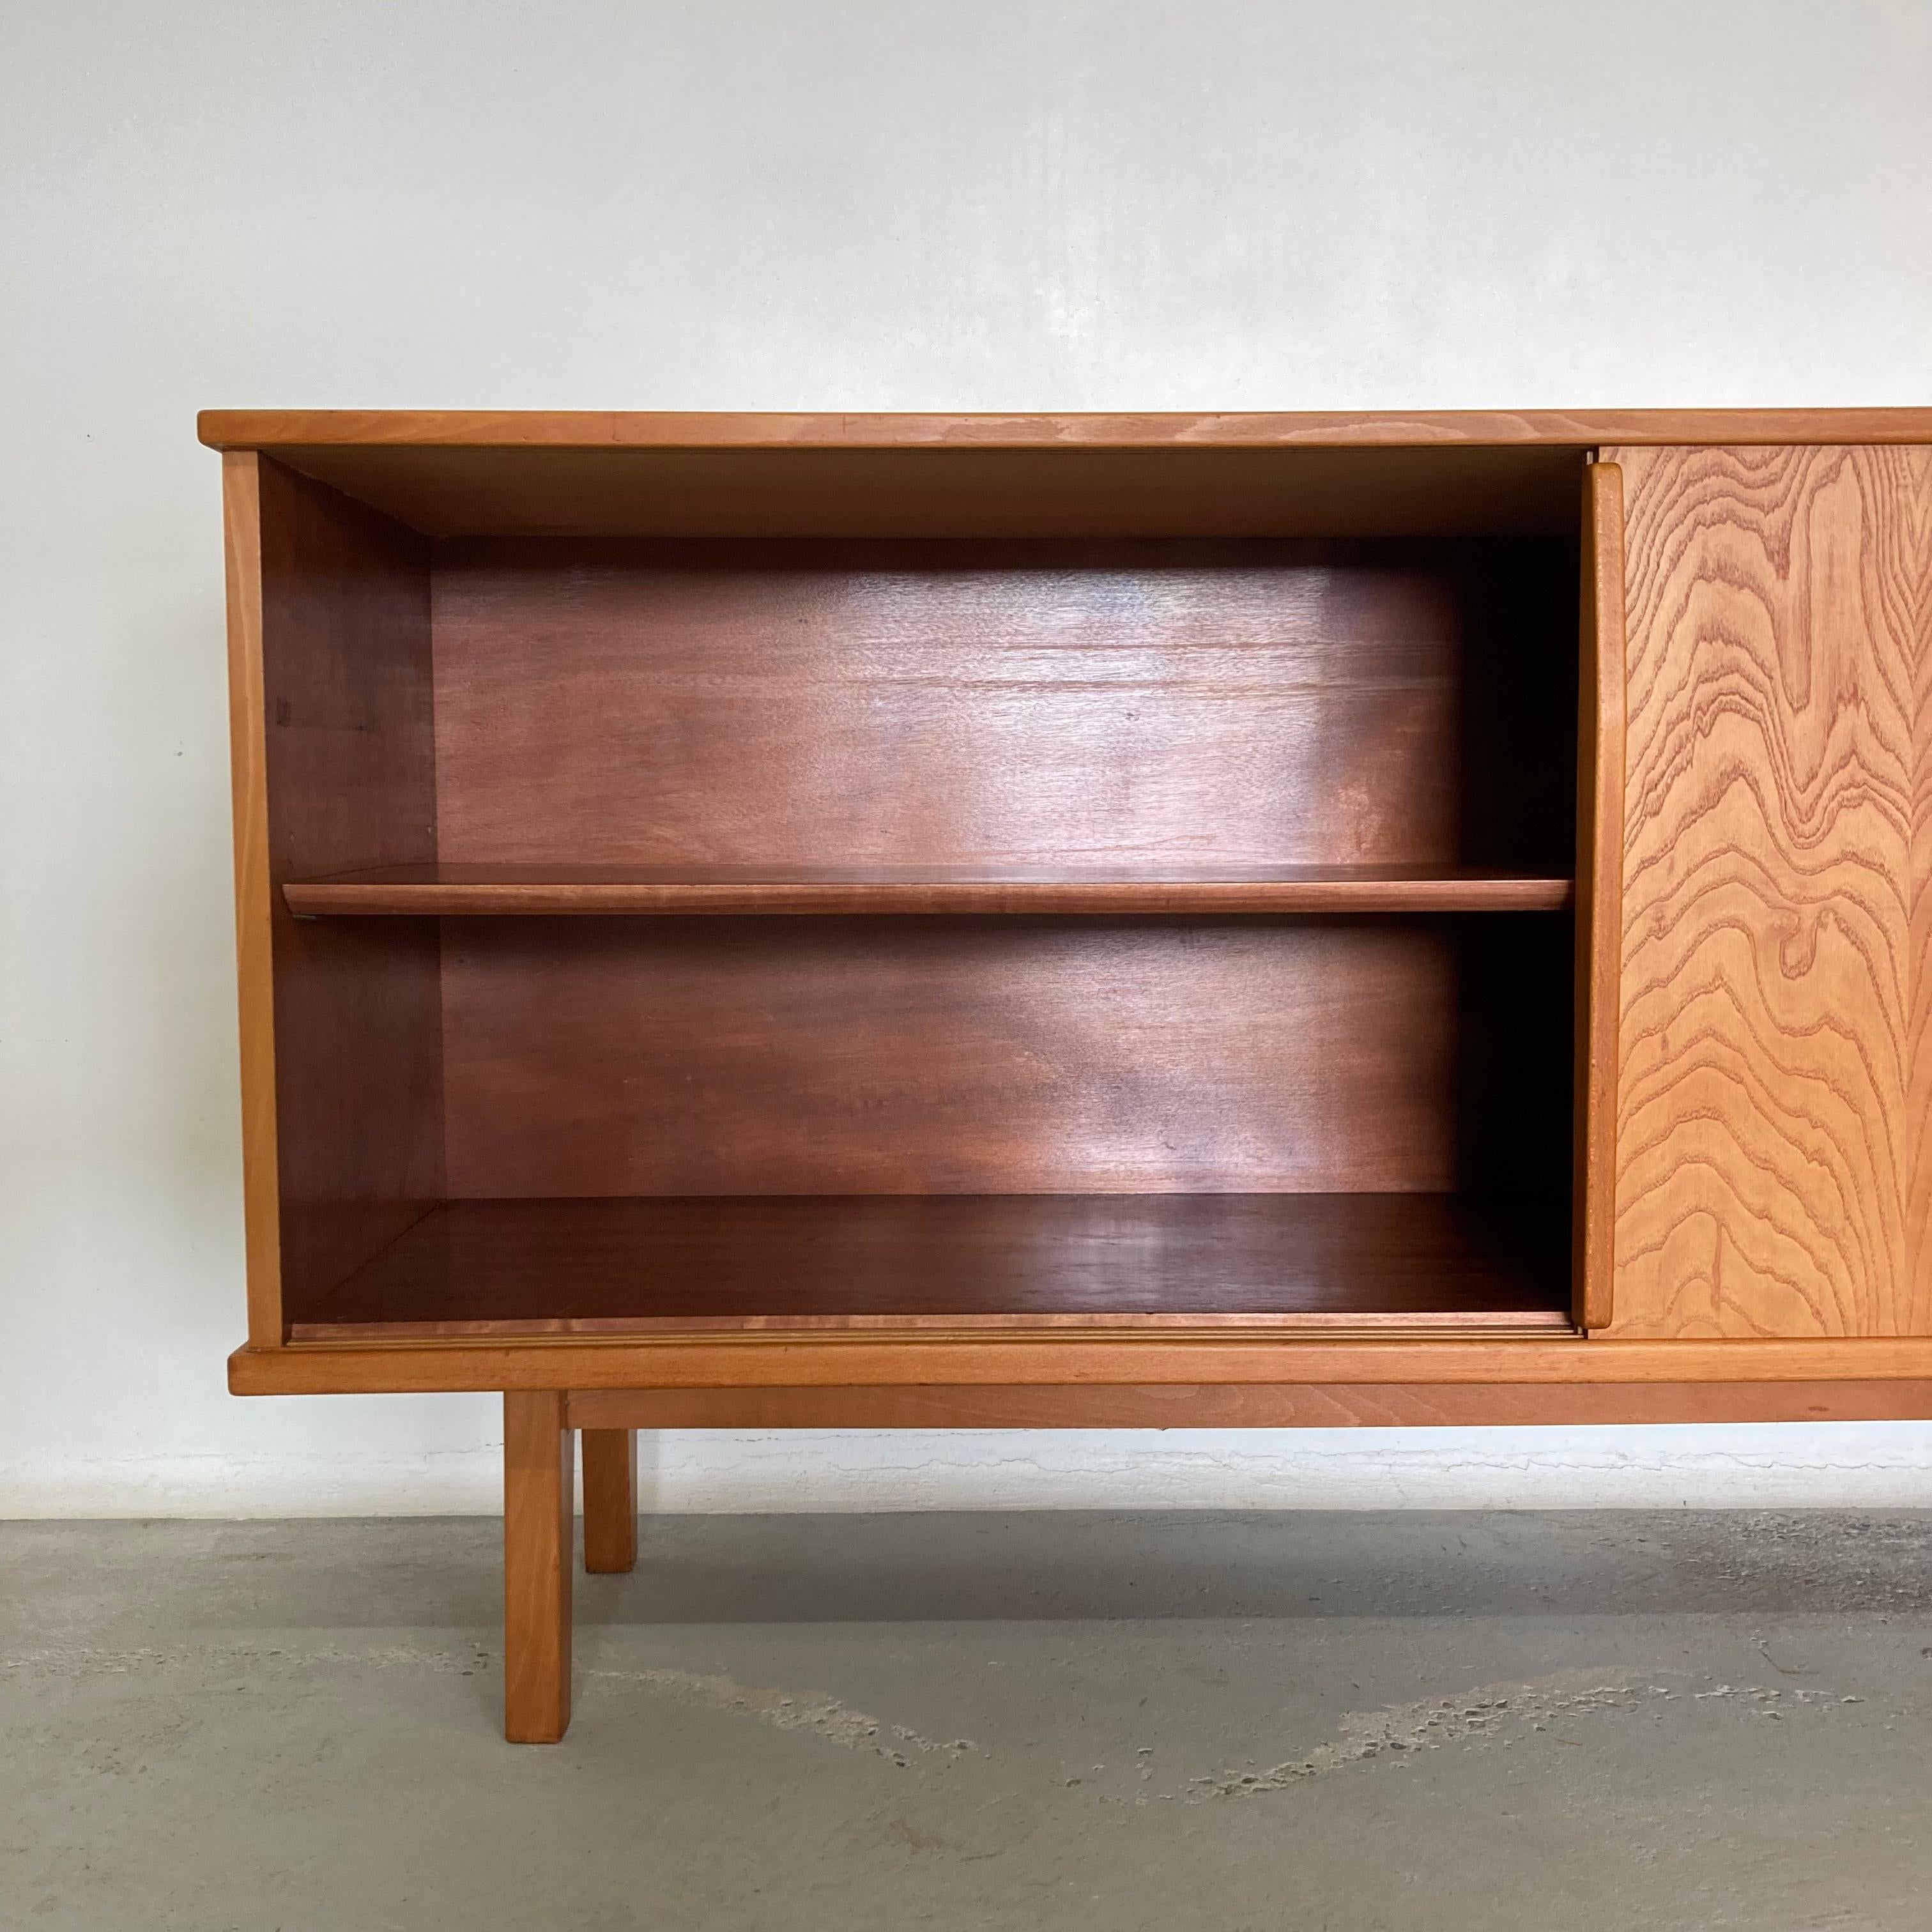 Veneer Ash Sideboard with Sliding Doors in the Style of Charlotte Perriand, France 1950